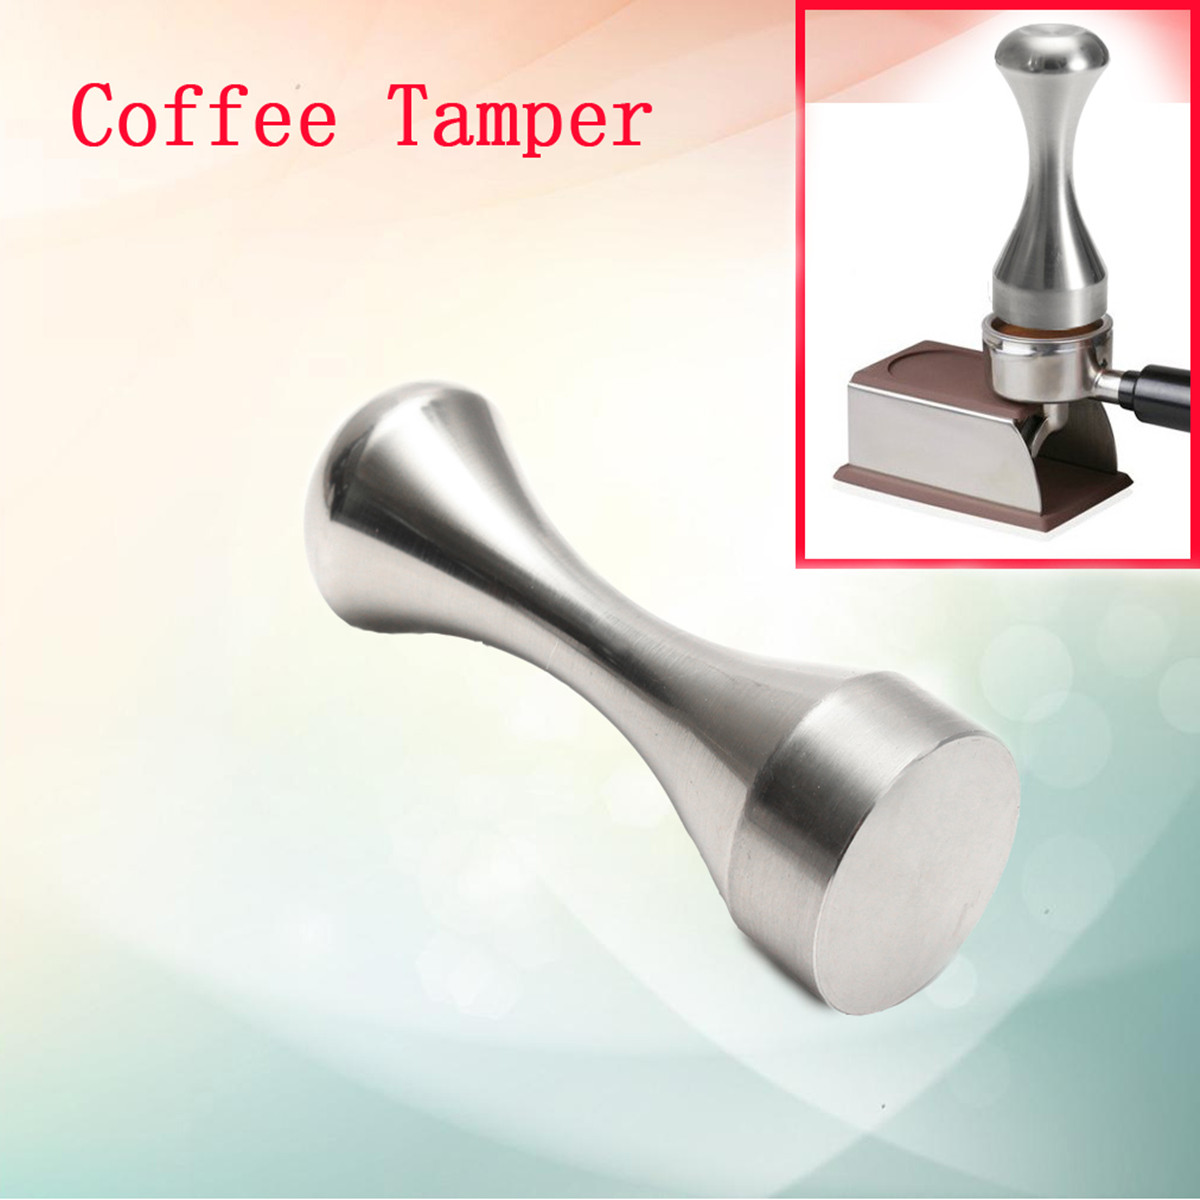 Stainless-Steel-Coffee-Tamper-For-Refillable-Reusable-Capsule-Coffee-Bean-Press-1166895-4